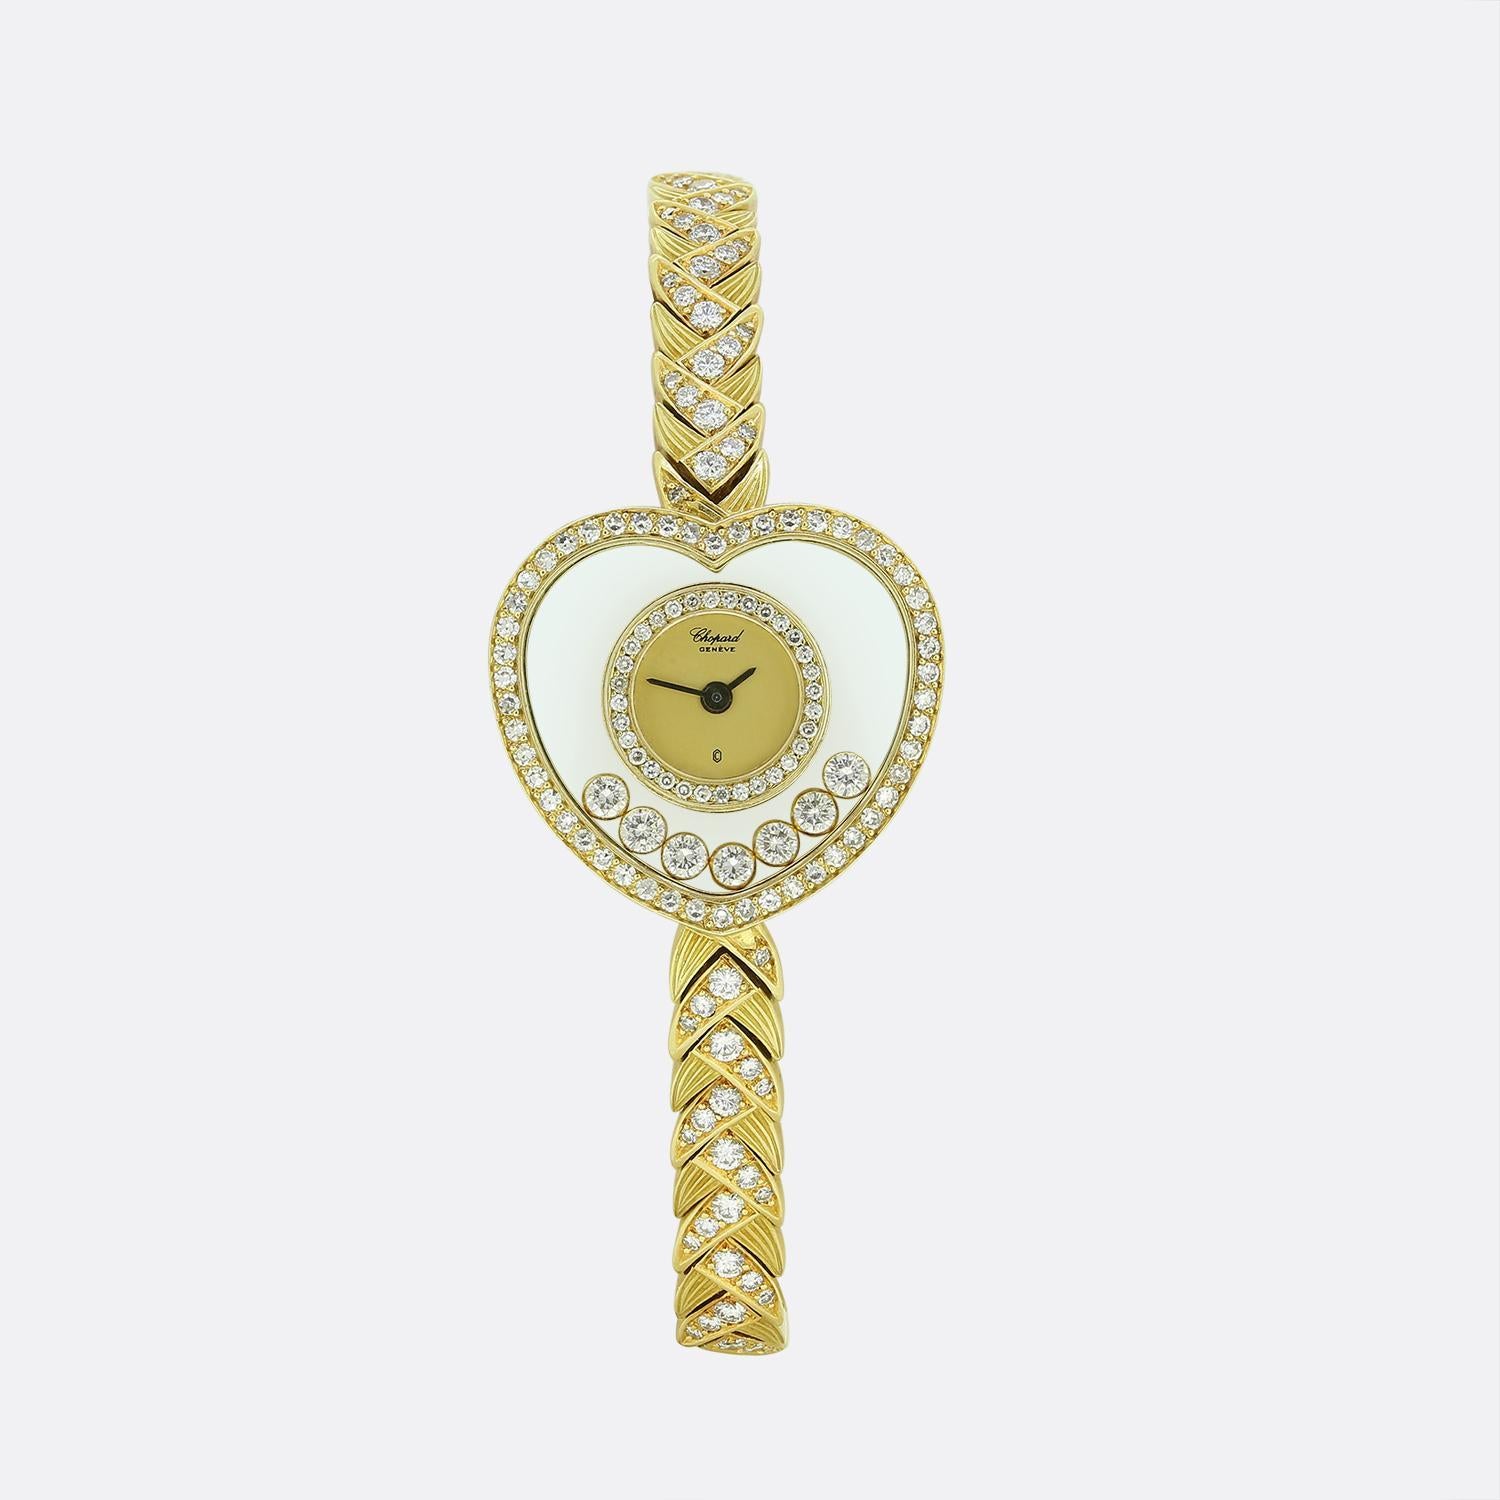 Here we have a fabulous diamond cocktail watch from the world renowned French jewellery designer, Chopard. This 'Happy Diamonds' piece has been crafted from a rich 18ct yellow gold and features a champagne dial with a distinctive bezel shaped like a